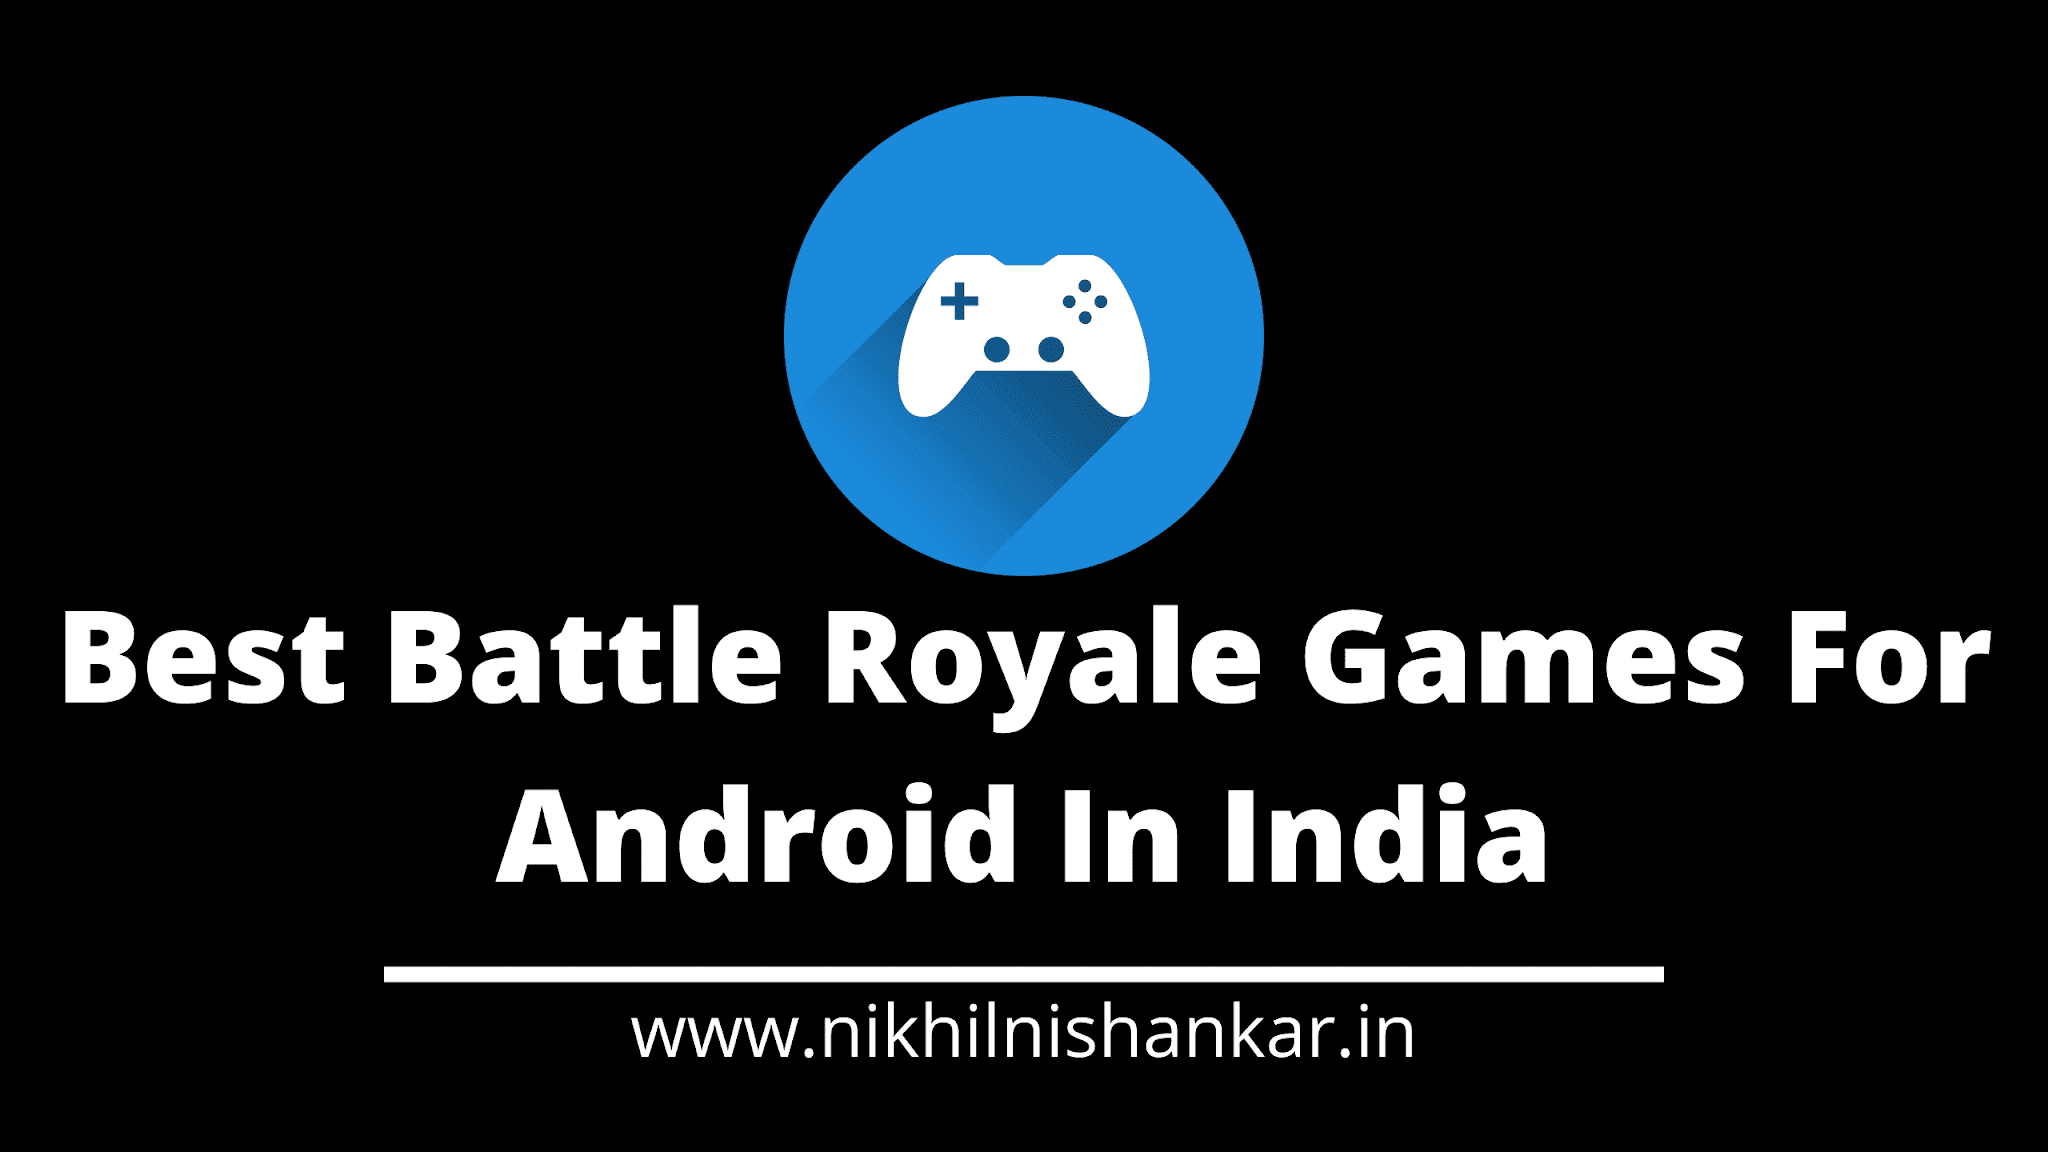 Best Battle Royale Games For Android In India